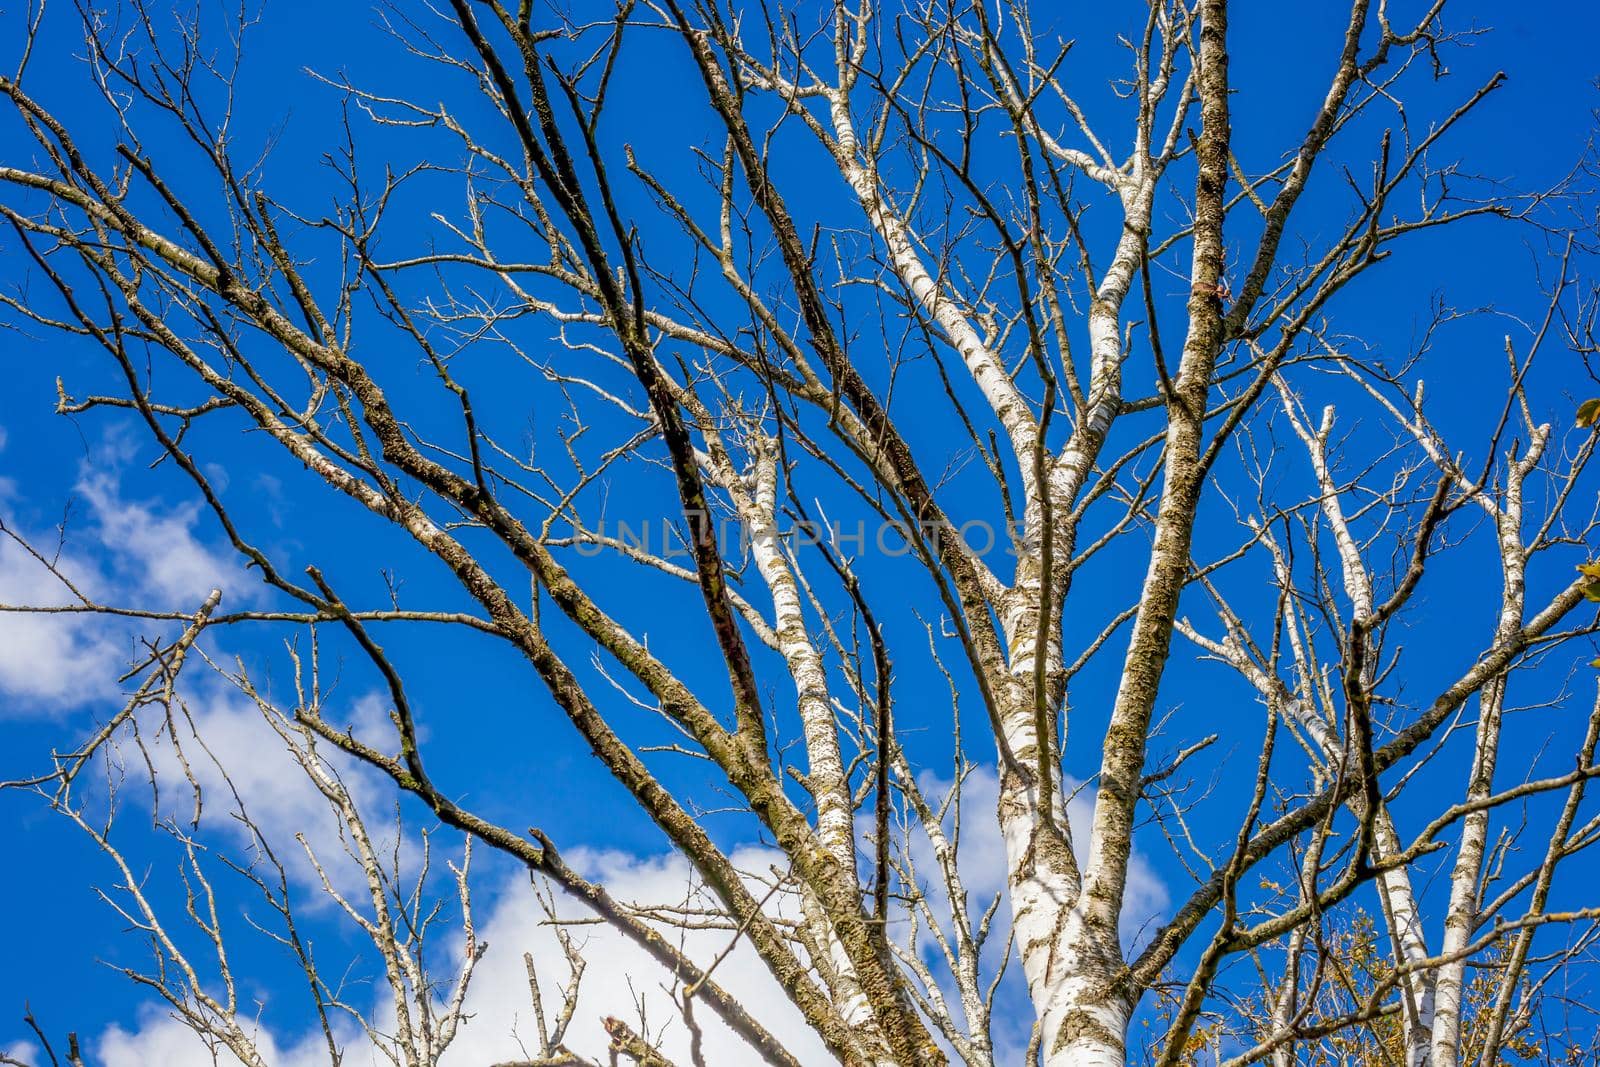 View into dry trees during spring against a blue sky. by MP_foto71